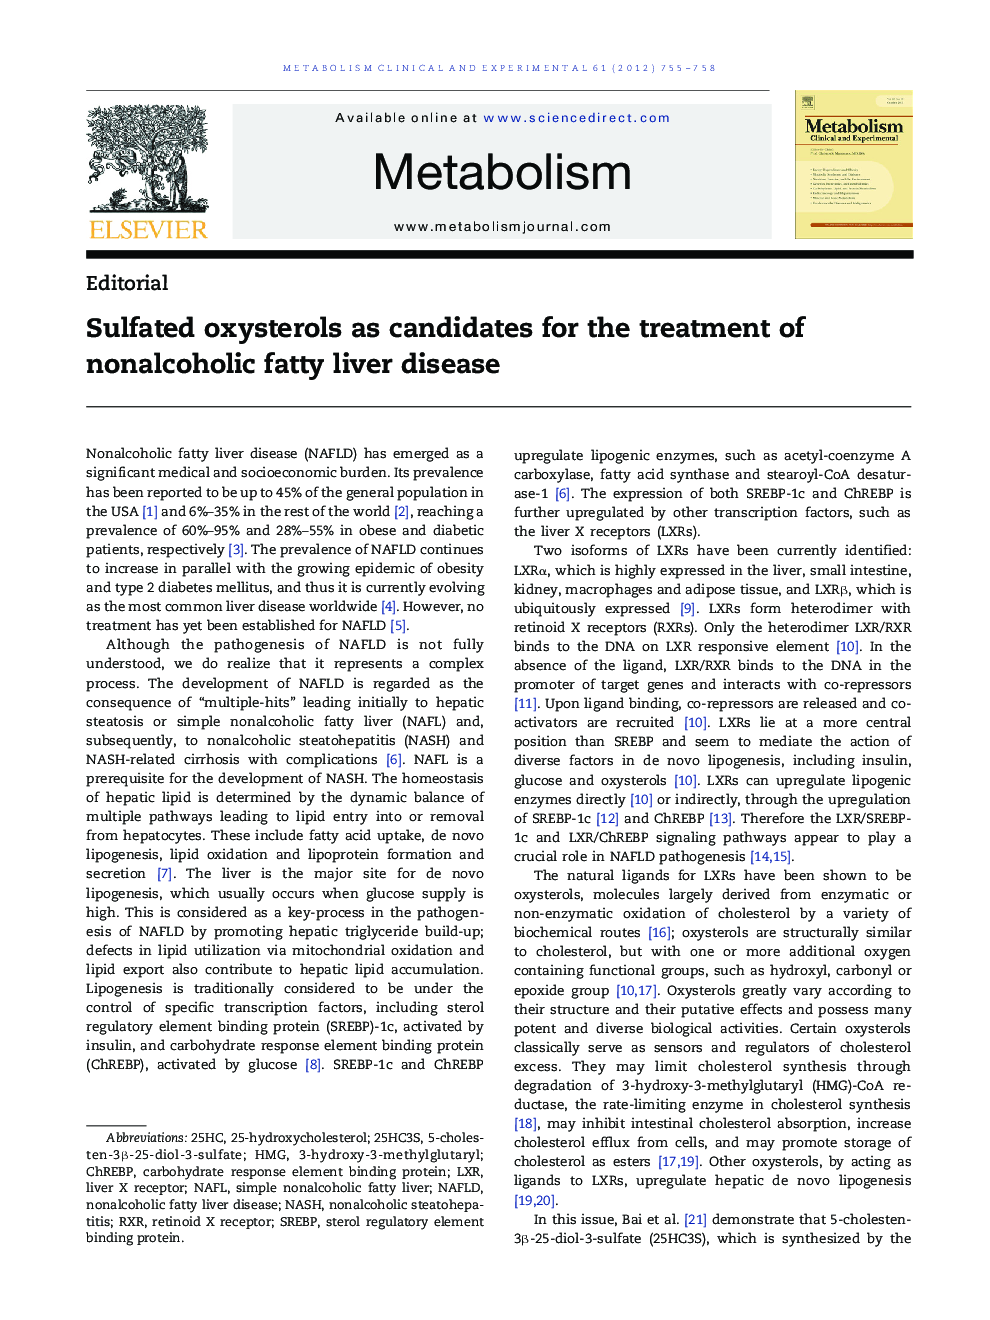 Sulfated oxysterols as candidates for the treatment of nonalcoholic fatty liver disease